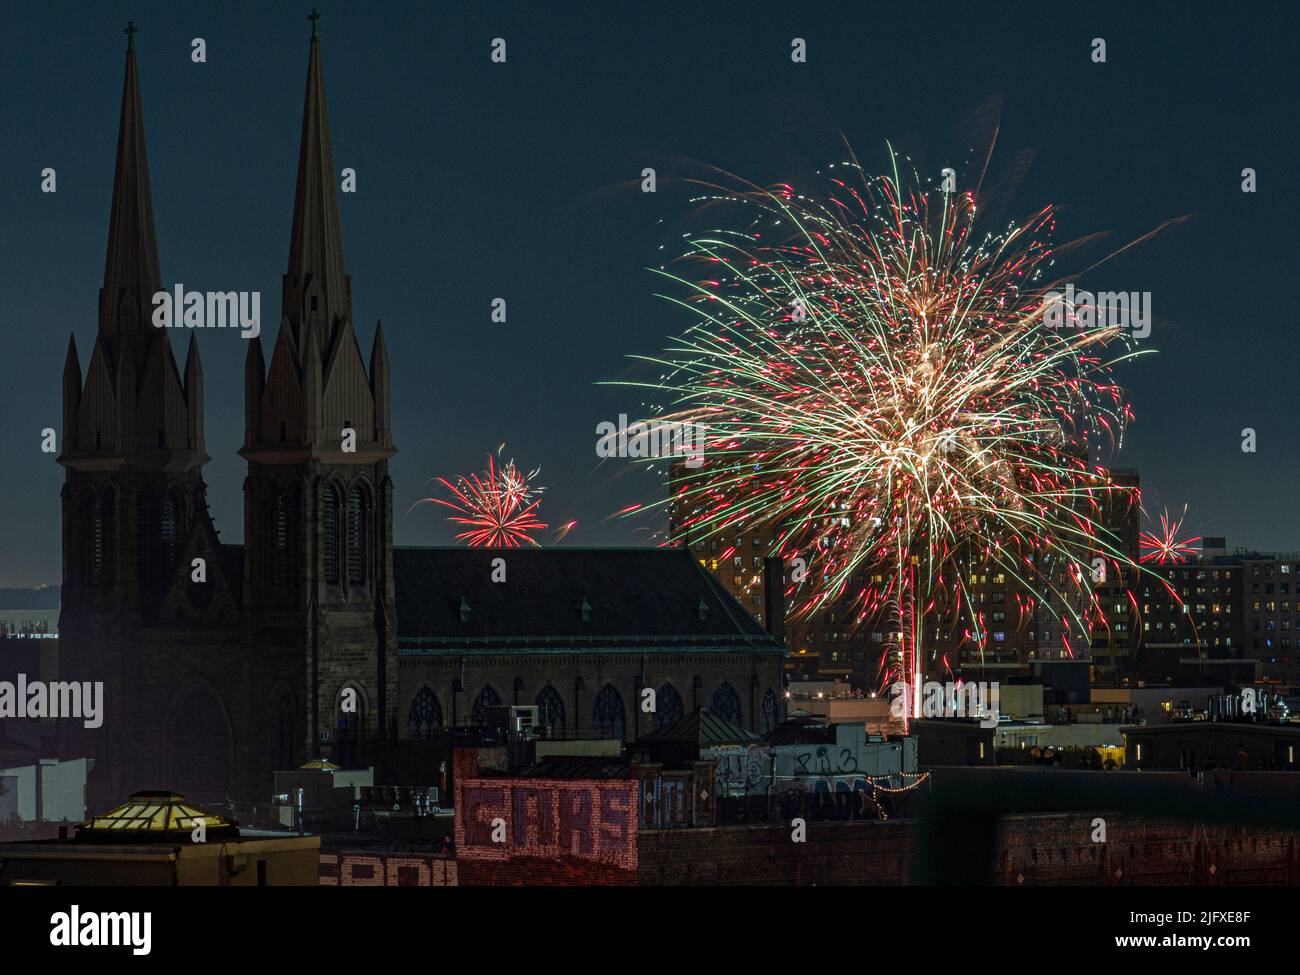 Fireworks in Williamsburg, Brooklyn, New York on the 4th of July. Stock Photo